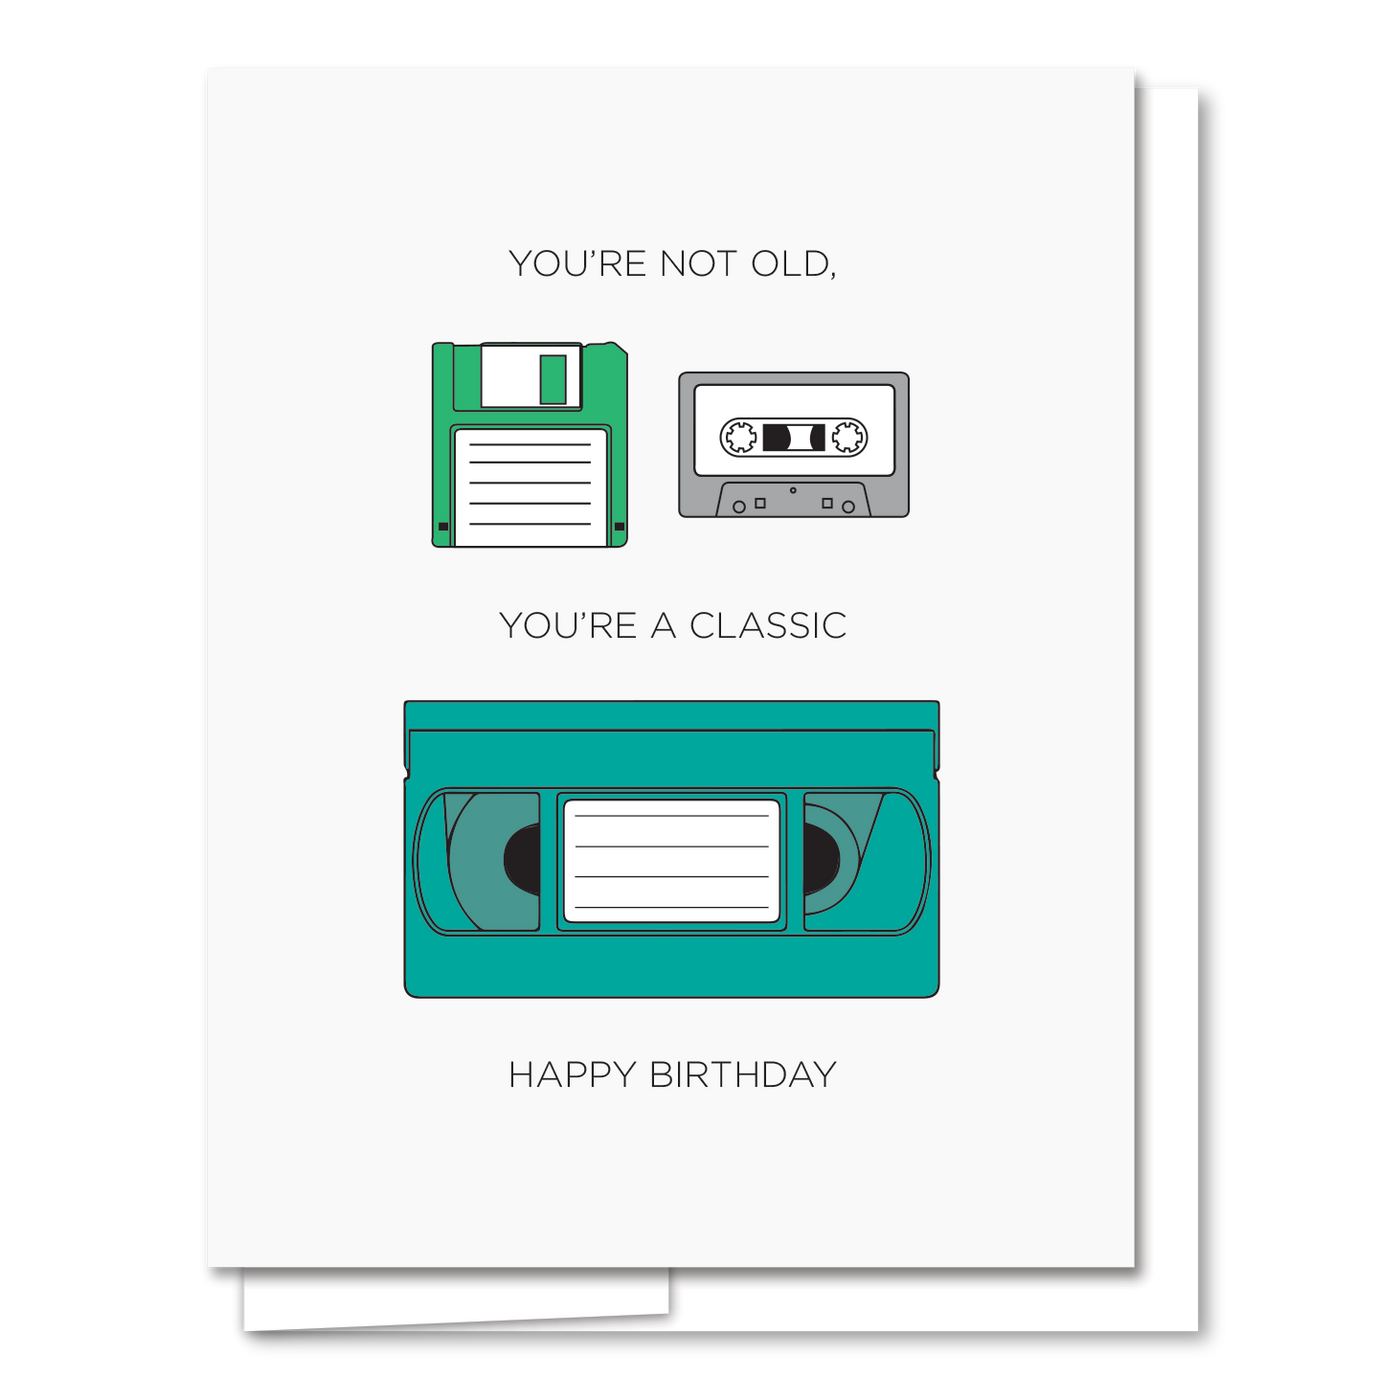 You're Not Old - Funny Birthday Card